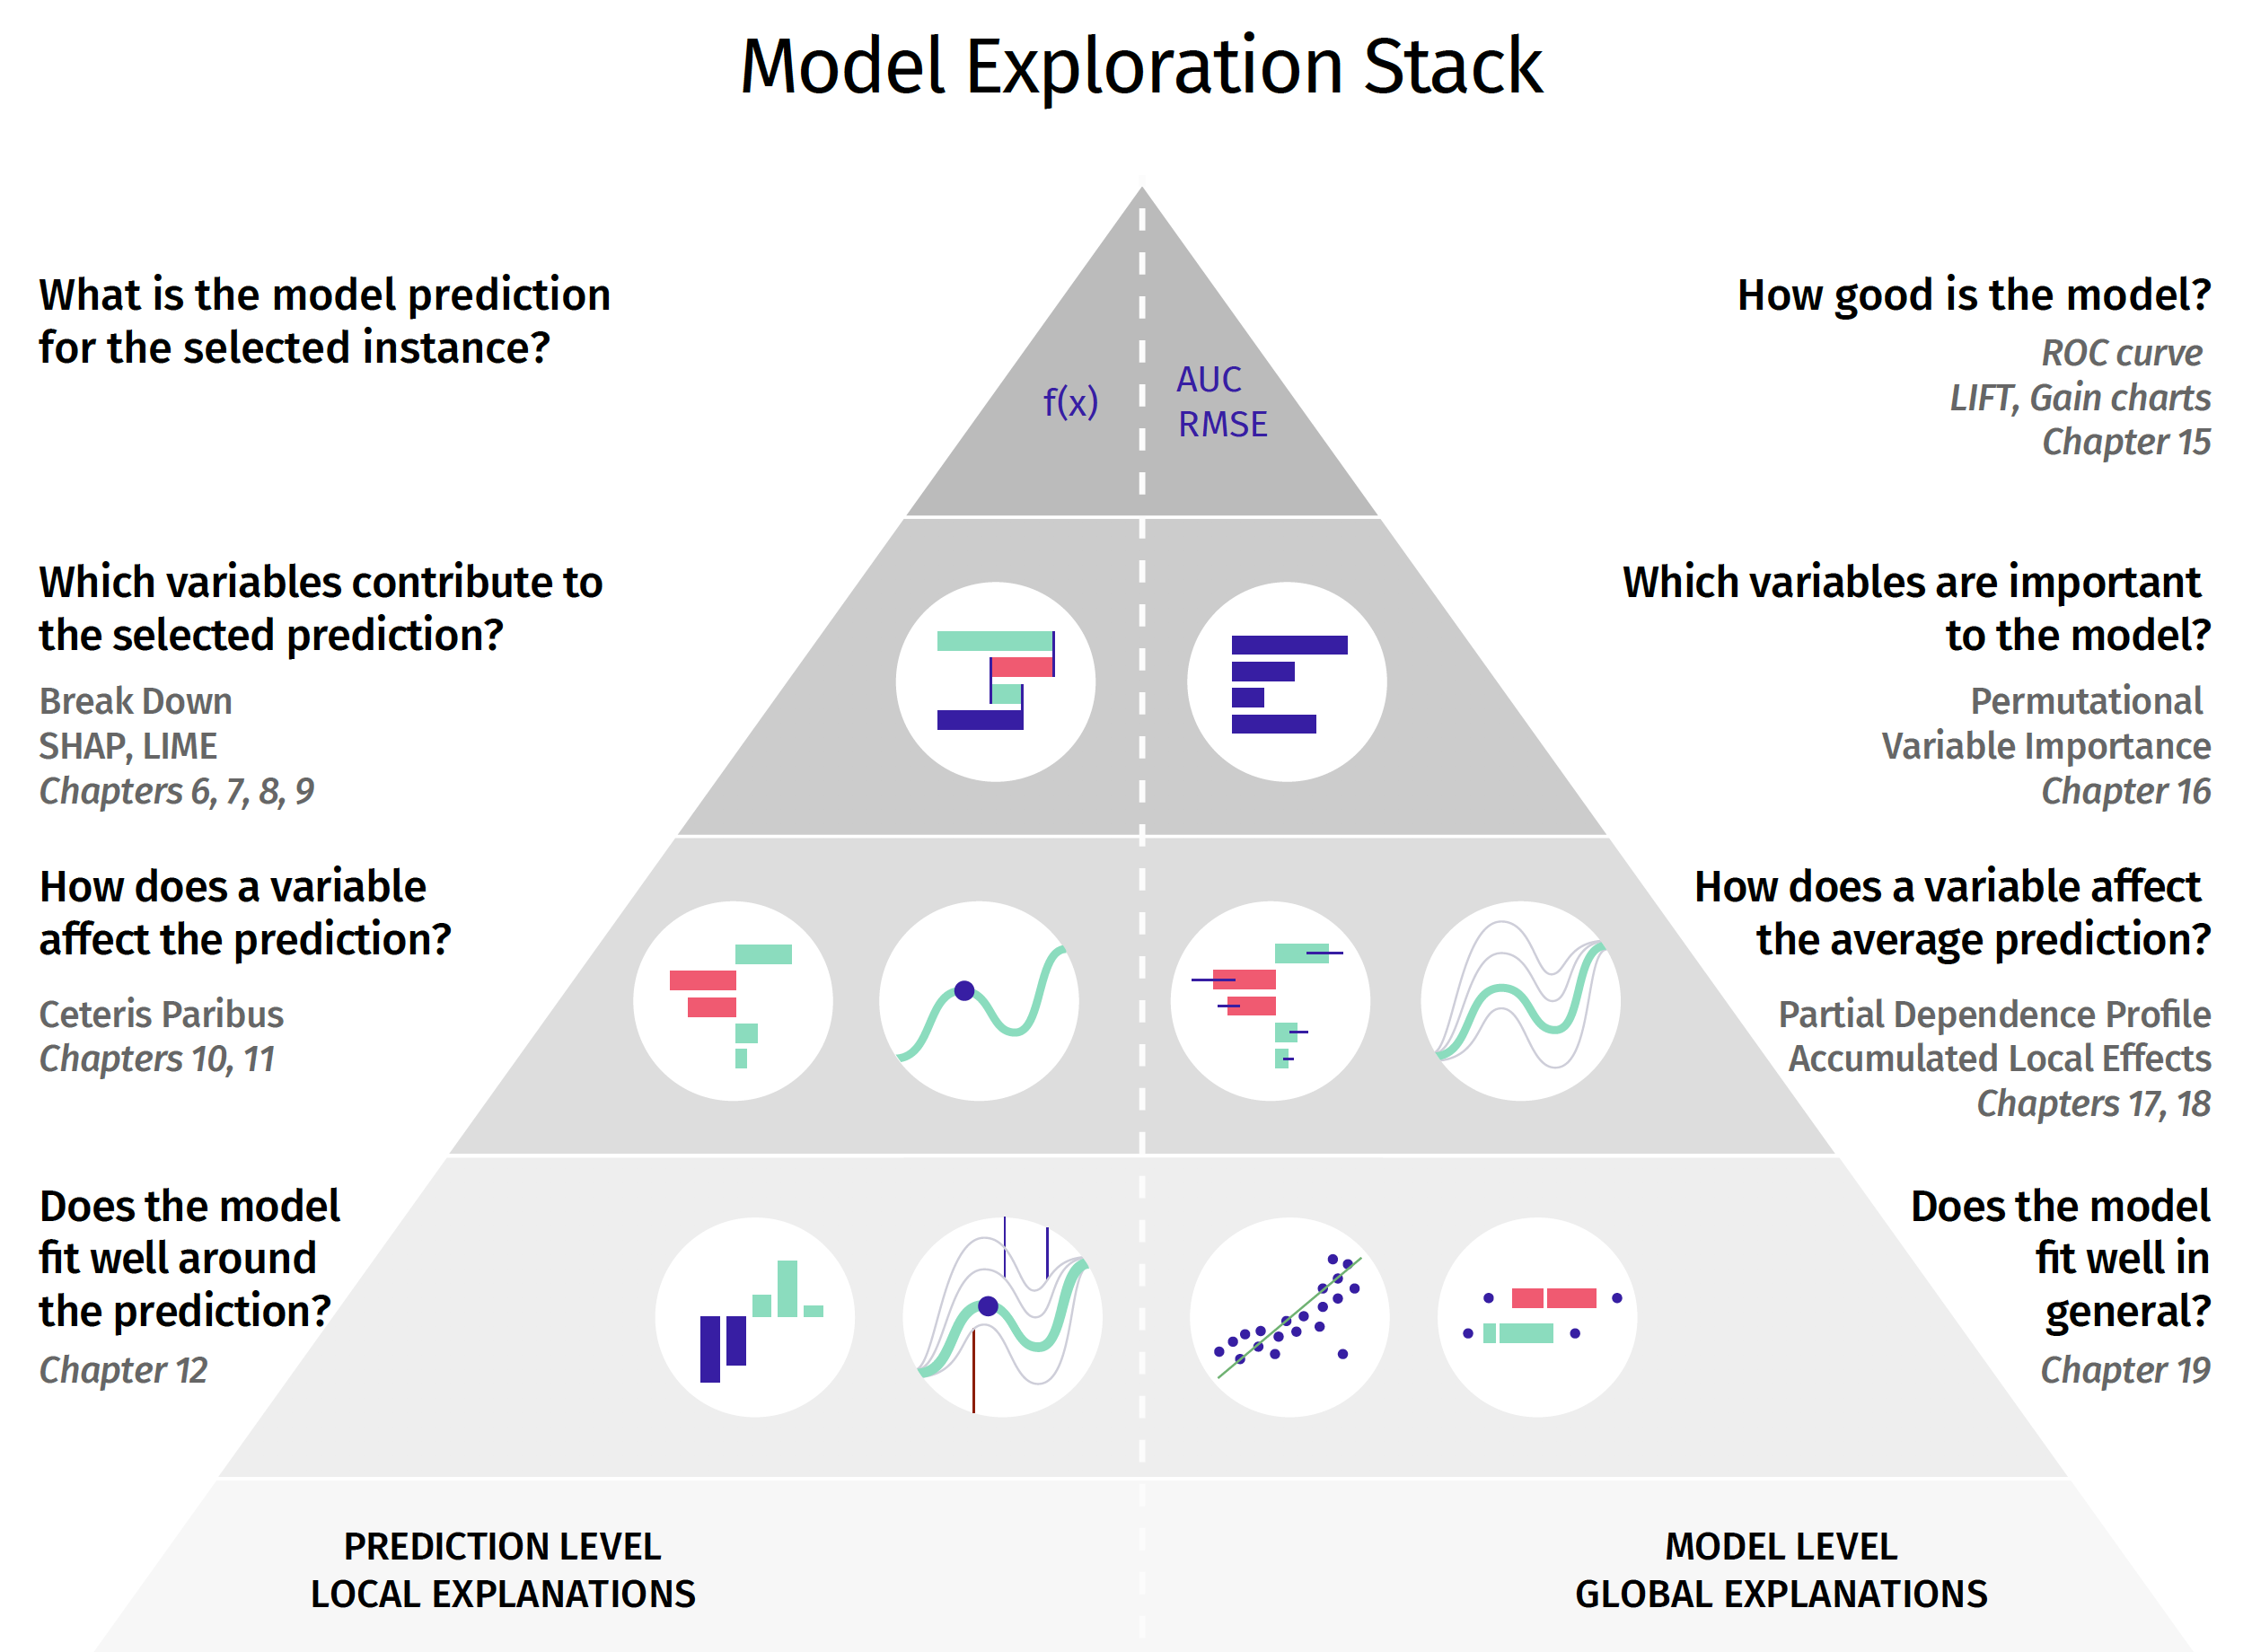 Model exploration methods presented in the book. The left-hand side (corresponding to the second part of the book) focuses on instance-level exploration, while the right-hand side (corresponding to the third part of the book) focuses on dataset-level exploration. Consecutive layers of the stack are linked with a deeper level of model exploration. The layers are linked with law’s of model exploration introduced in Section 1.2.